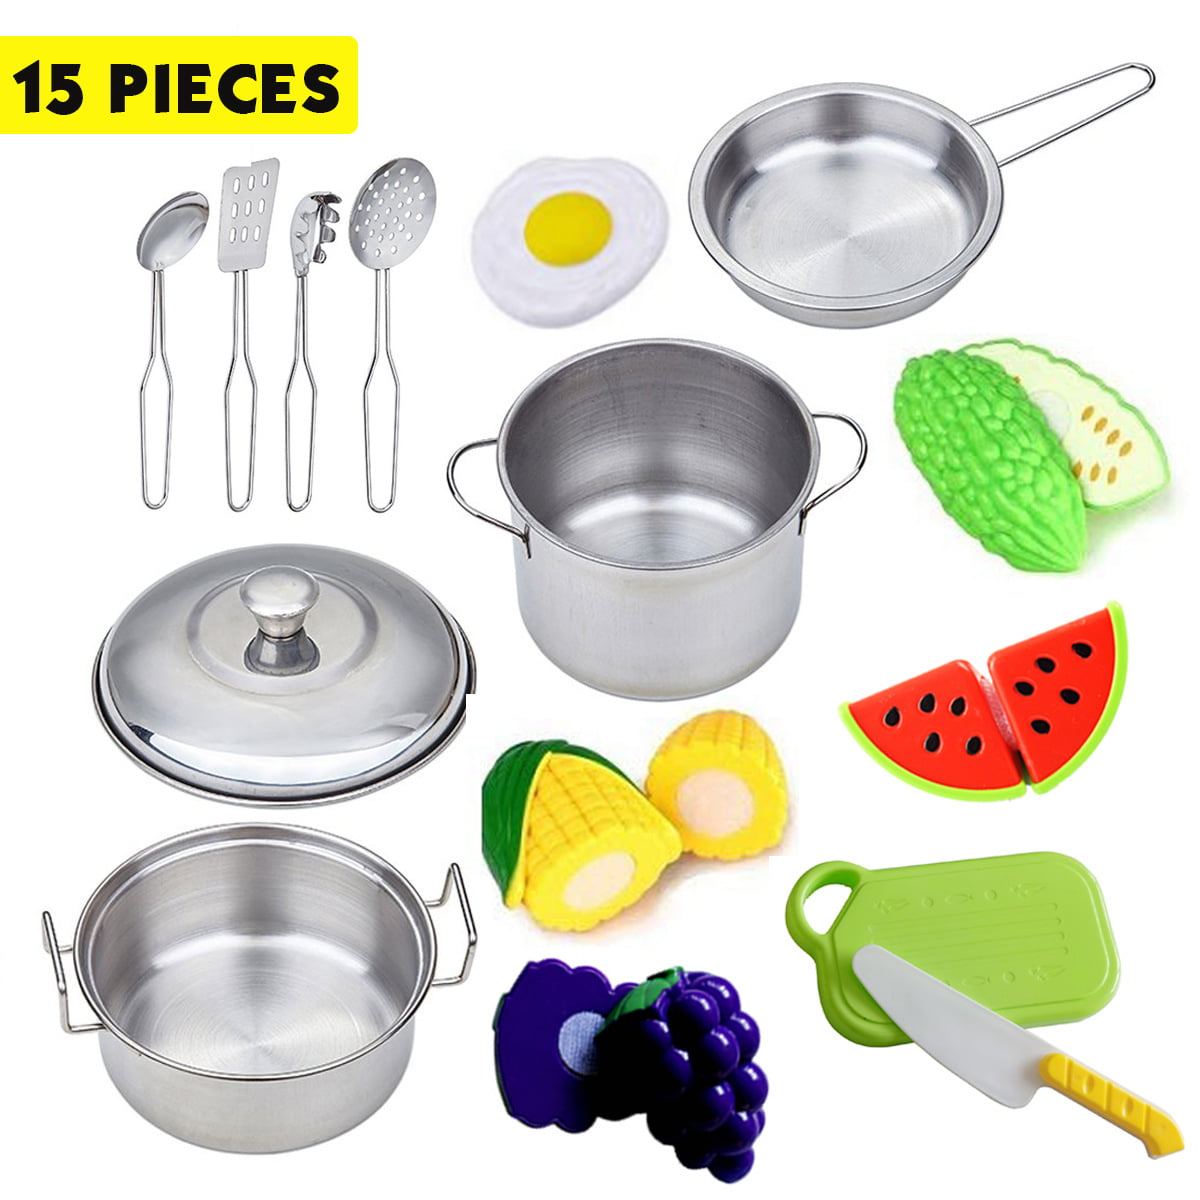 16Pcs Kids Play House Kitchen Toys Cookware Cooking Utensils Pots Pans Gift New 